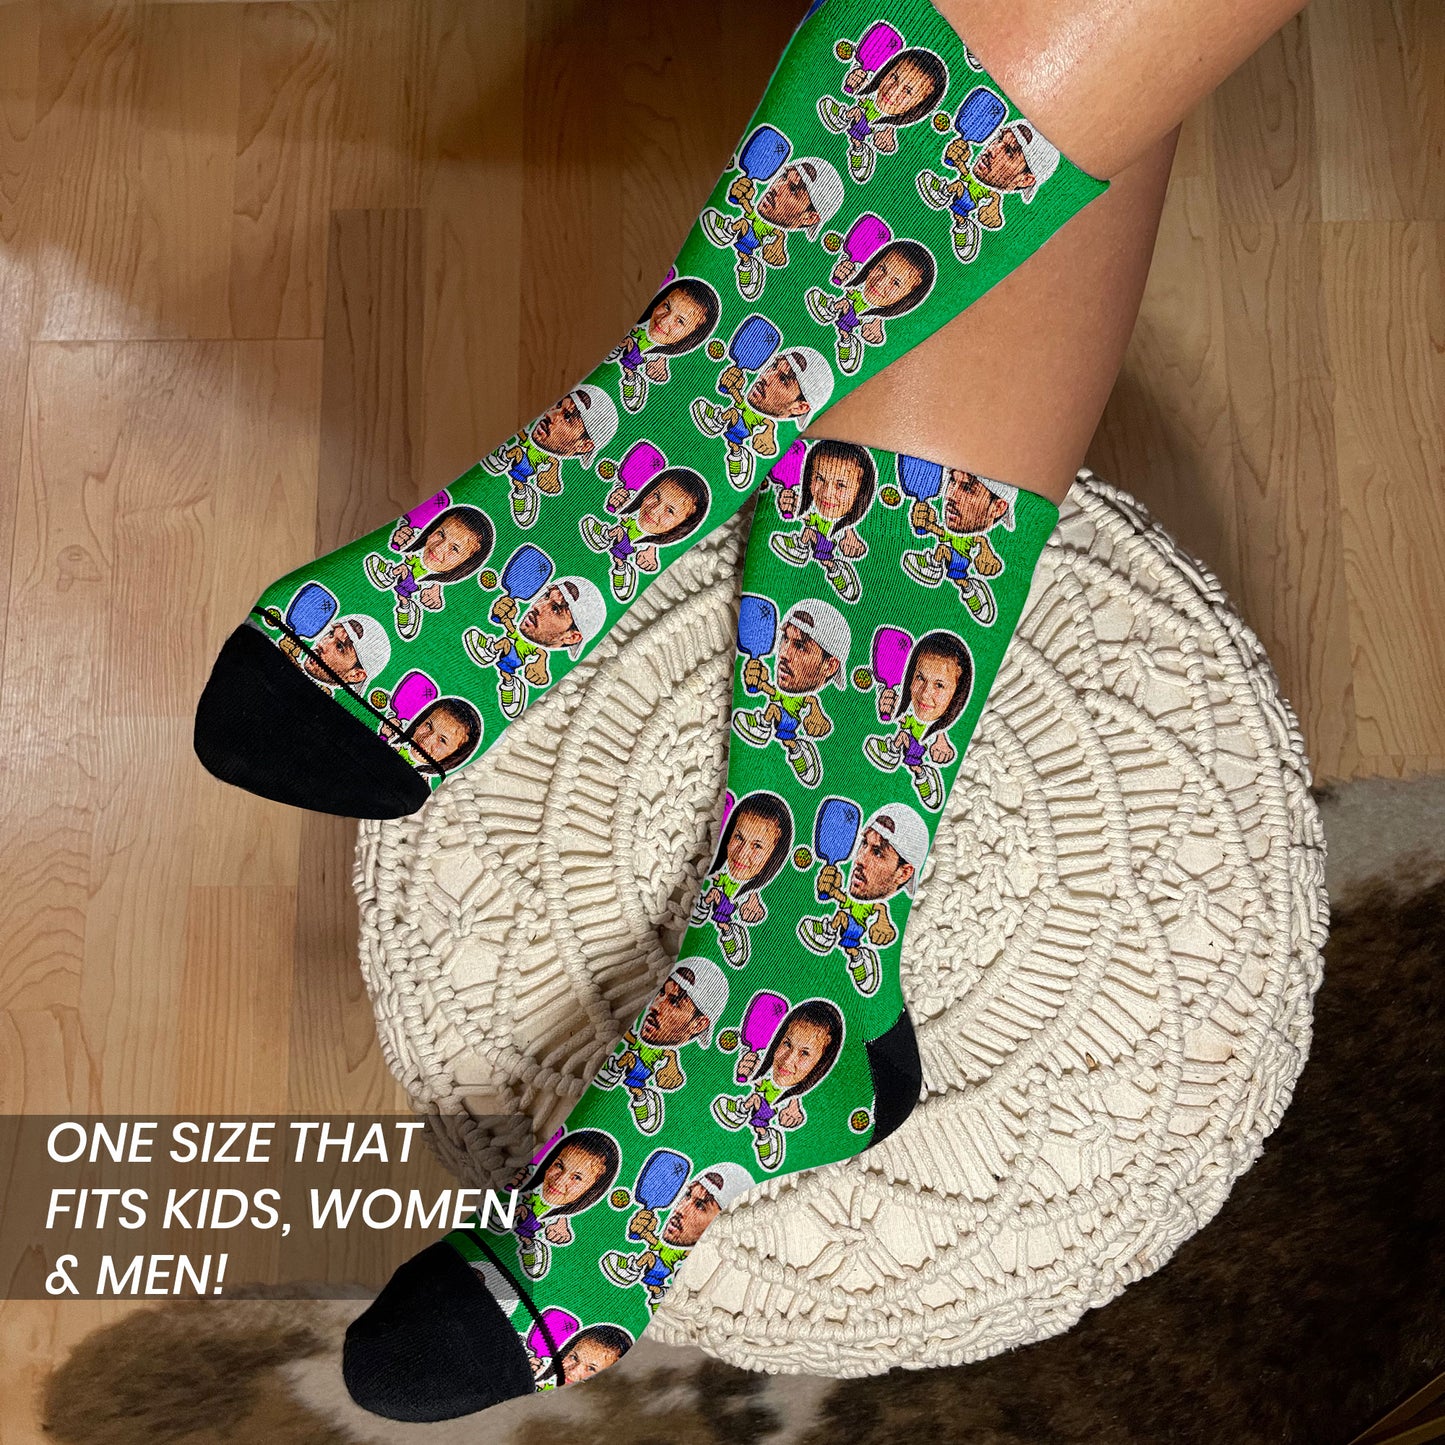 pickleball socks in green on a female's feet to show fit